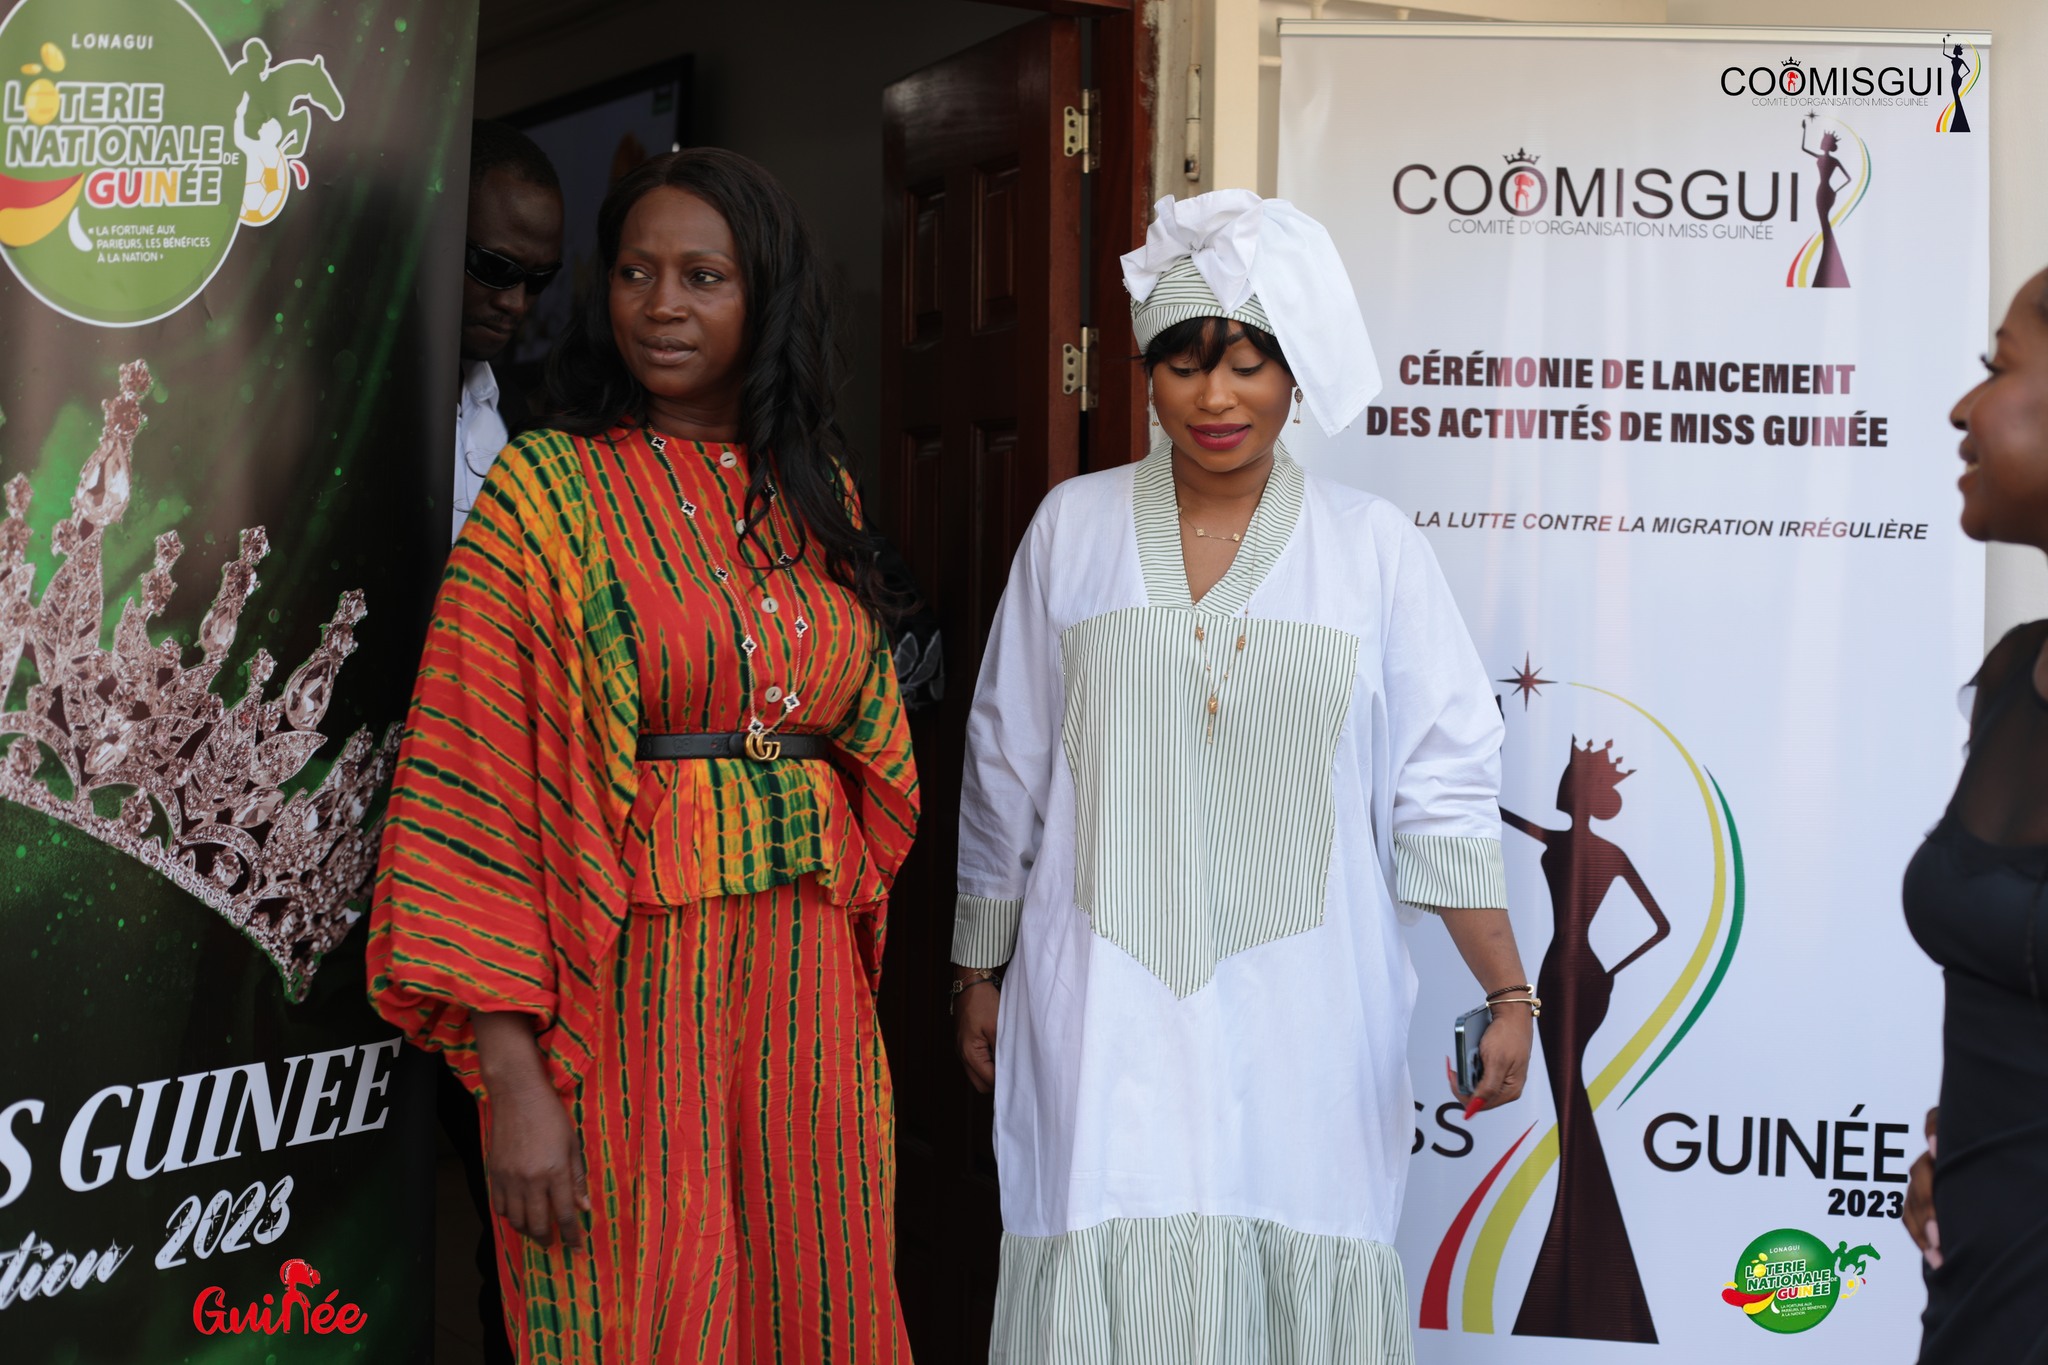 COOMISGUI 2023 by Aminata DIALLO - Visit the Candidates Residence Miss GUINEE 2023  - A very Warm Welcoming for Madame Lauriane Doumbouya, the First Lady of the Guinee Republic & Madame Aicha Nanette Conté, Aicha Nanette Conté - Team Organization Madame  Madame Aminata DIALLO